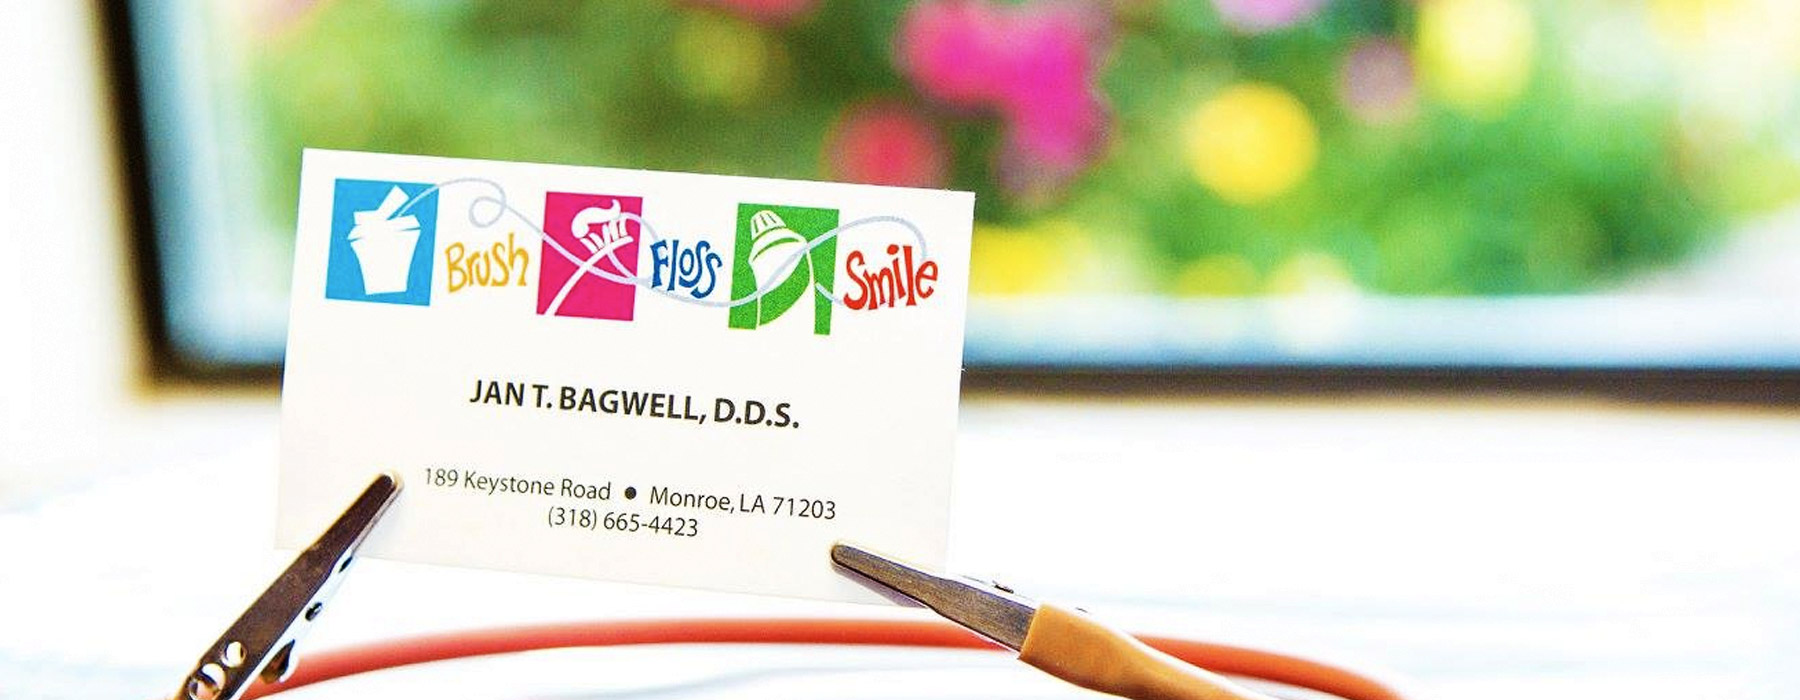 Drs. Jan T. Bagwell's business card.